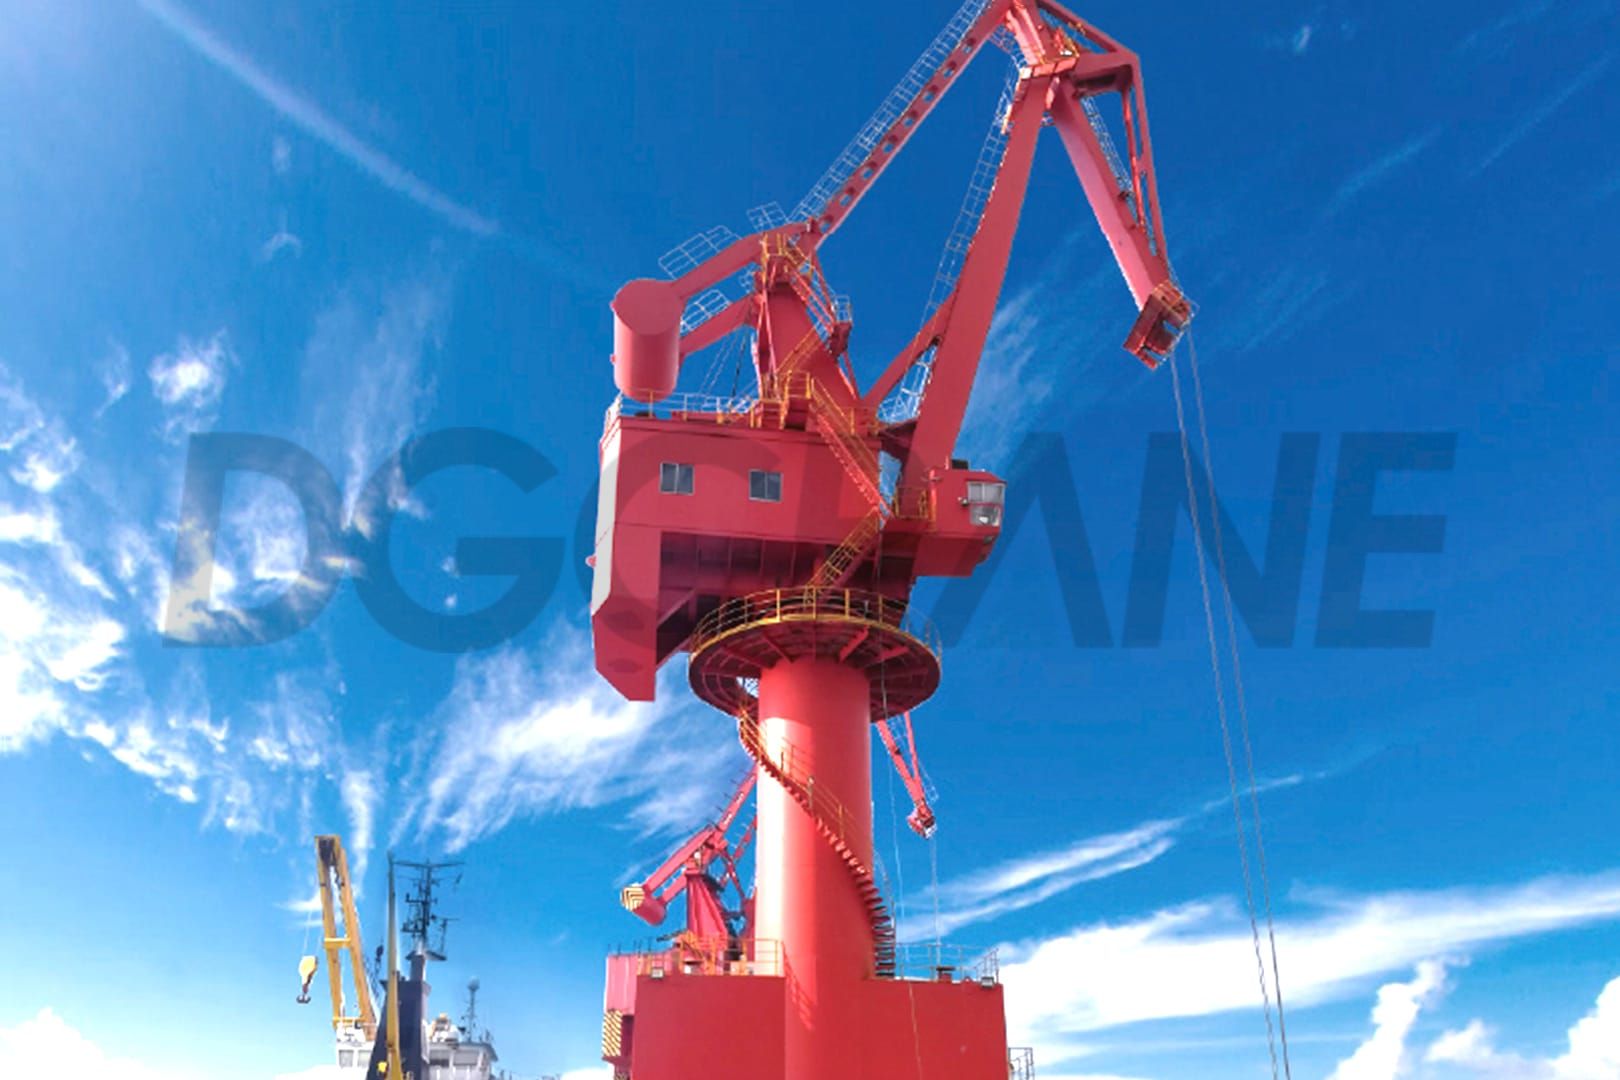 2 1Export of four link Portal crane to Sulawesi Indonesia